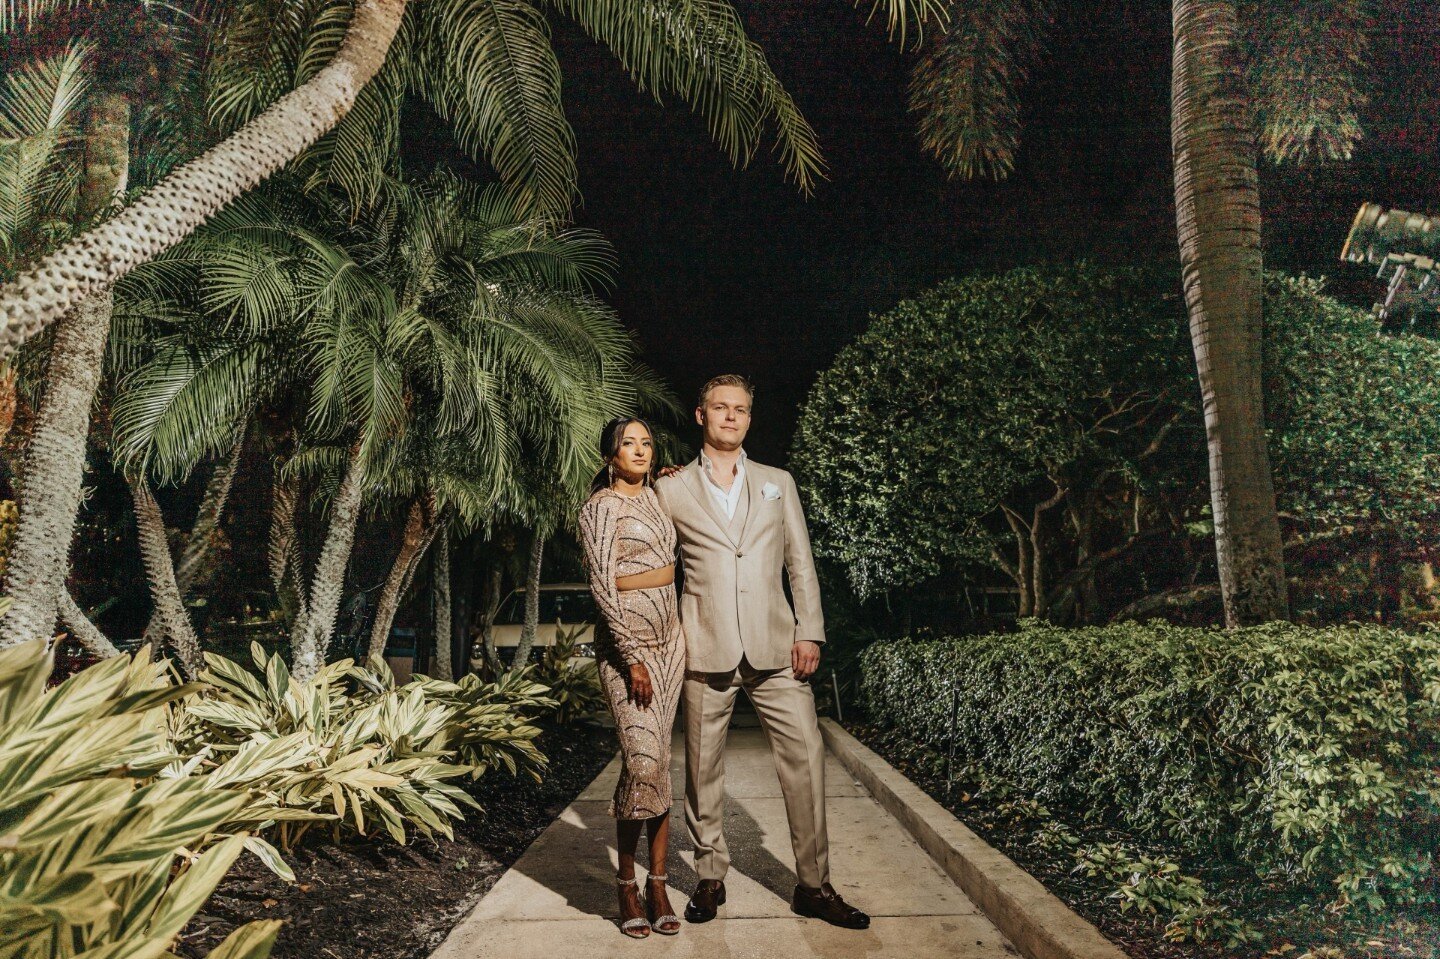 Last but certainly not least, welcome to our final stop on the throwback of our Premini World Tour: Palm Beach ☀️

Planner: @preminievents @elizabethpriyakumar @danielletlampron
Bride and Groom: @mooshoox3 @dementievalex
Venue: @pganational
Decor: @x